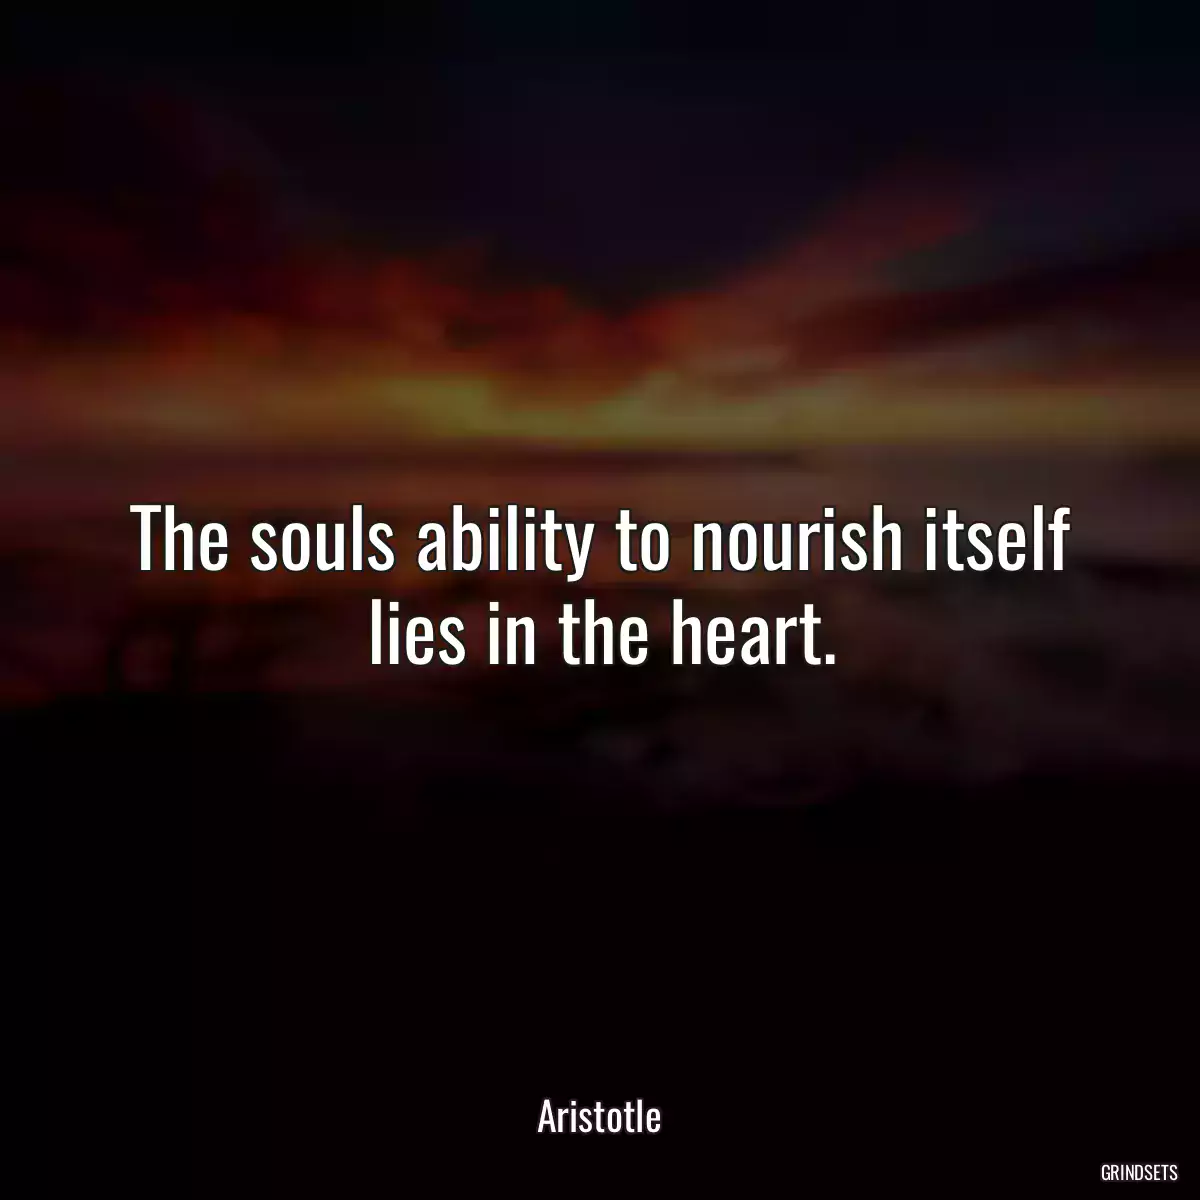 The souls ability to nourish itself lies in the heart.